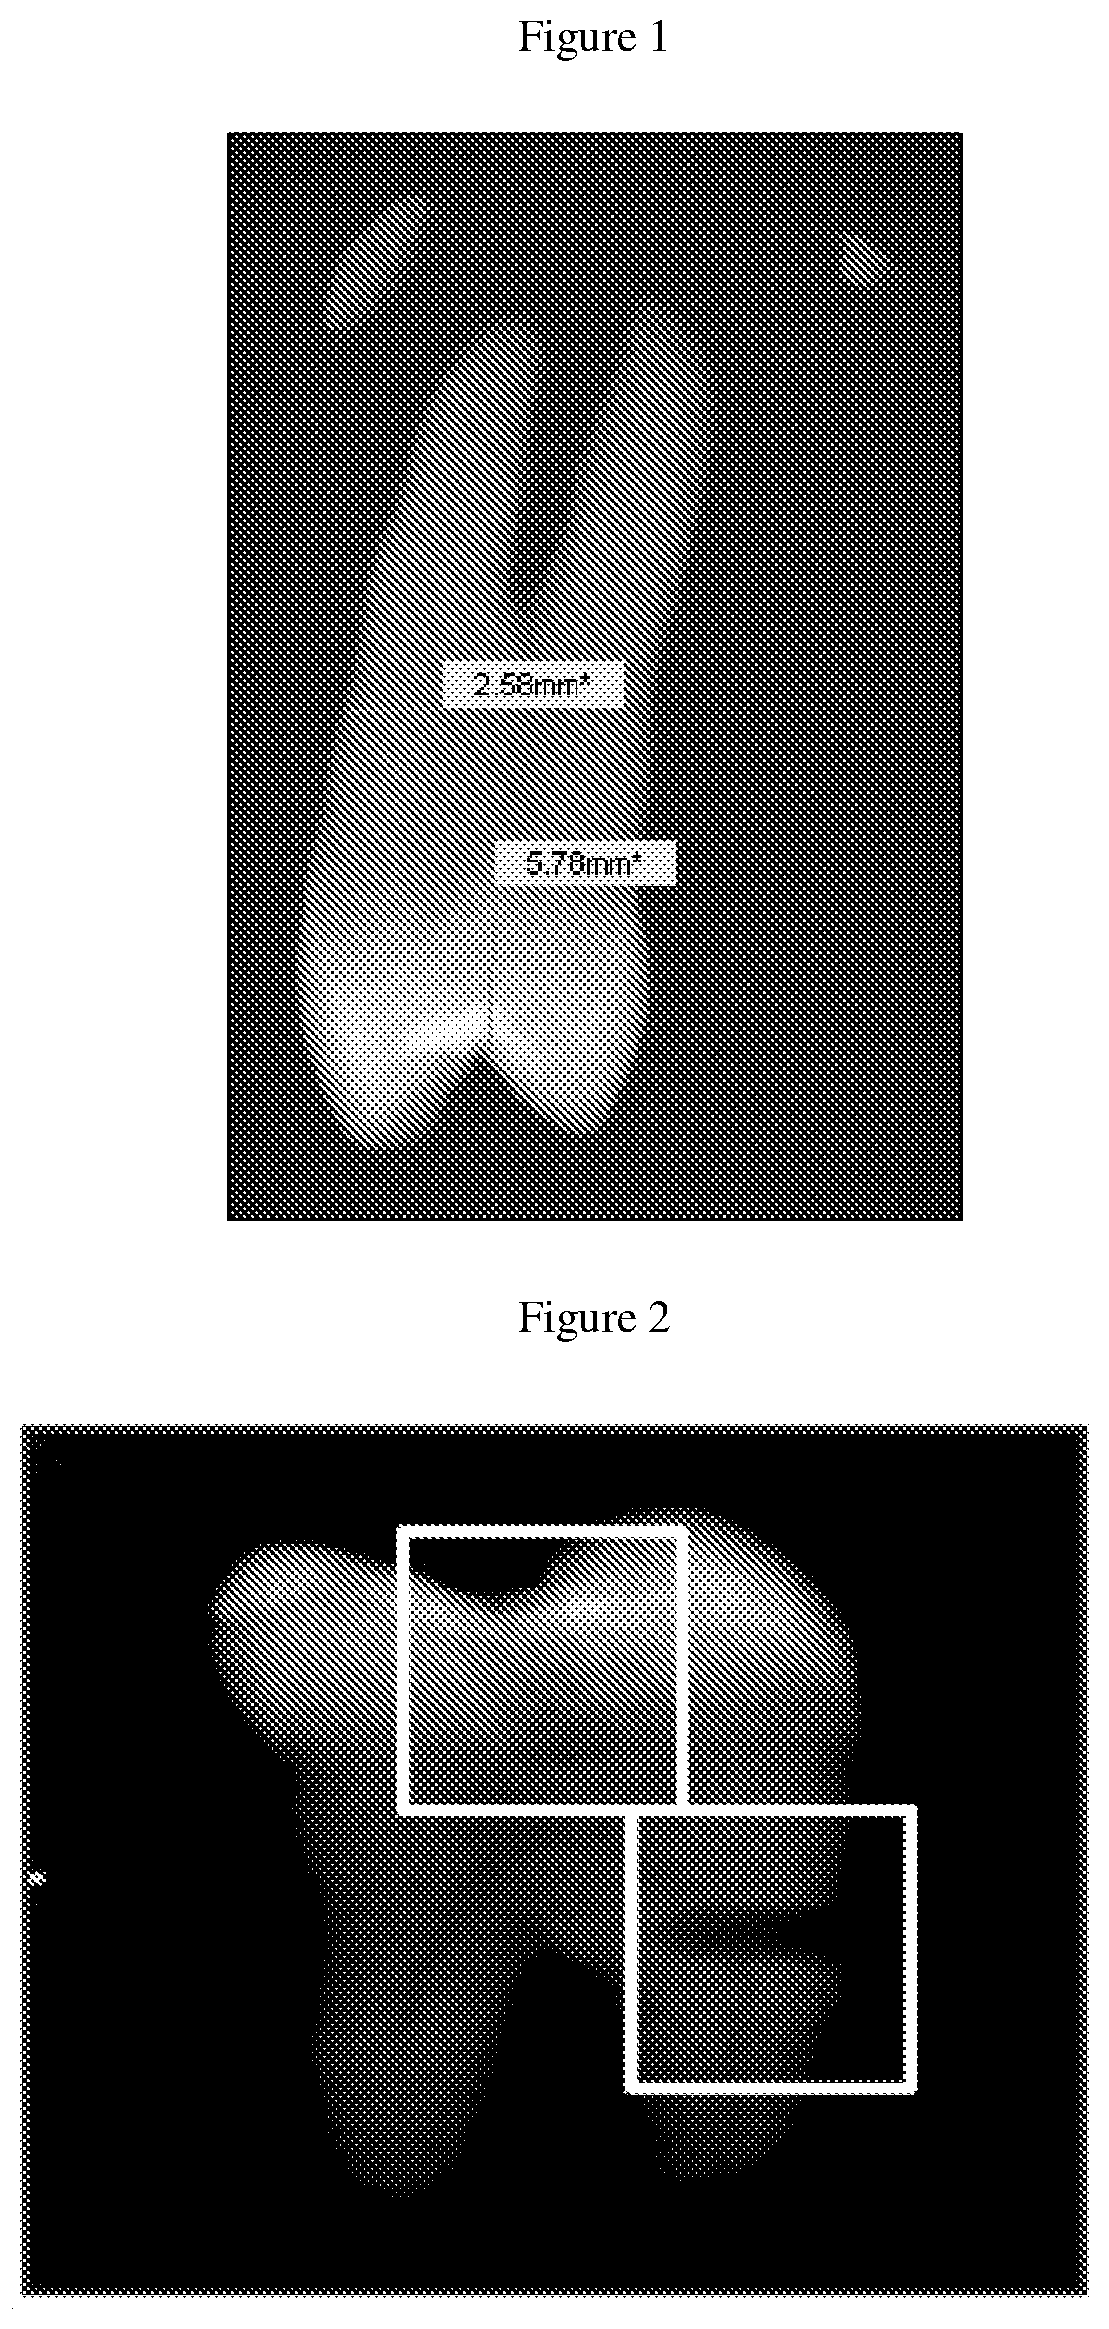 Method, systems and kit for forensic identification, post mortem interval estimation and cause of death determination by recovery of dental tissue in physiological conditions